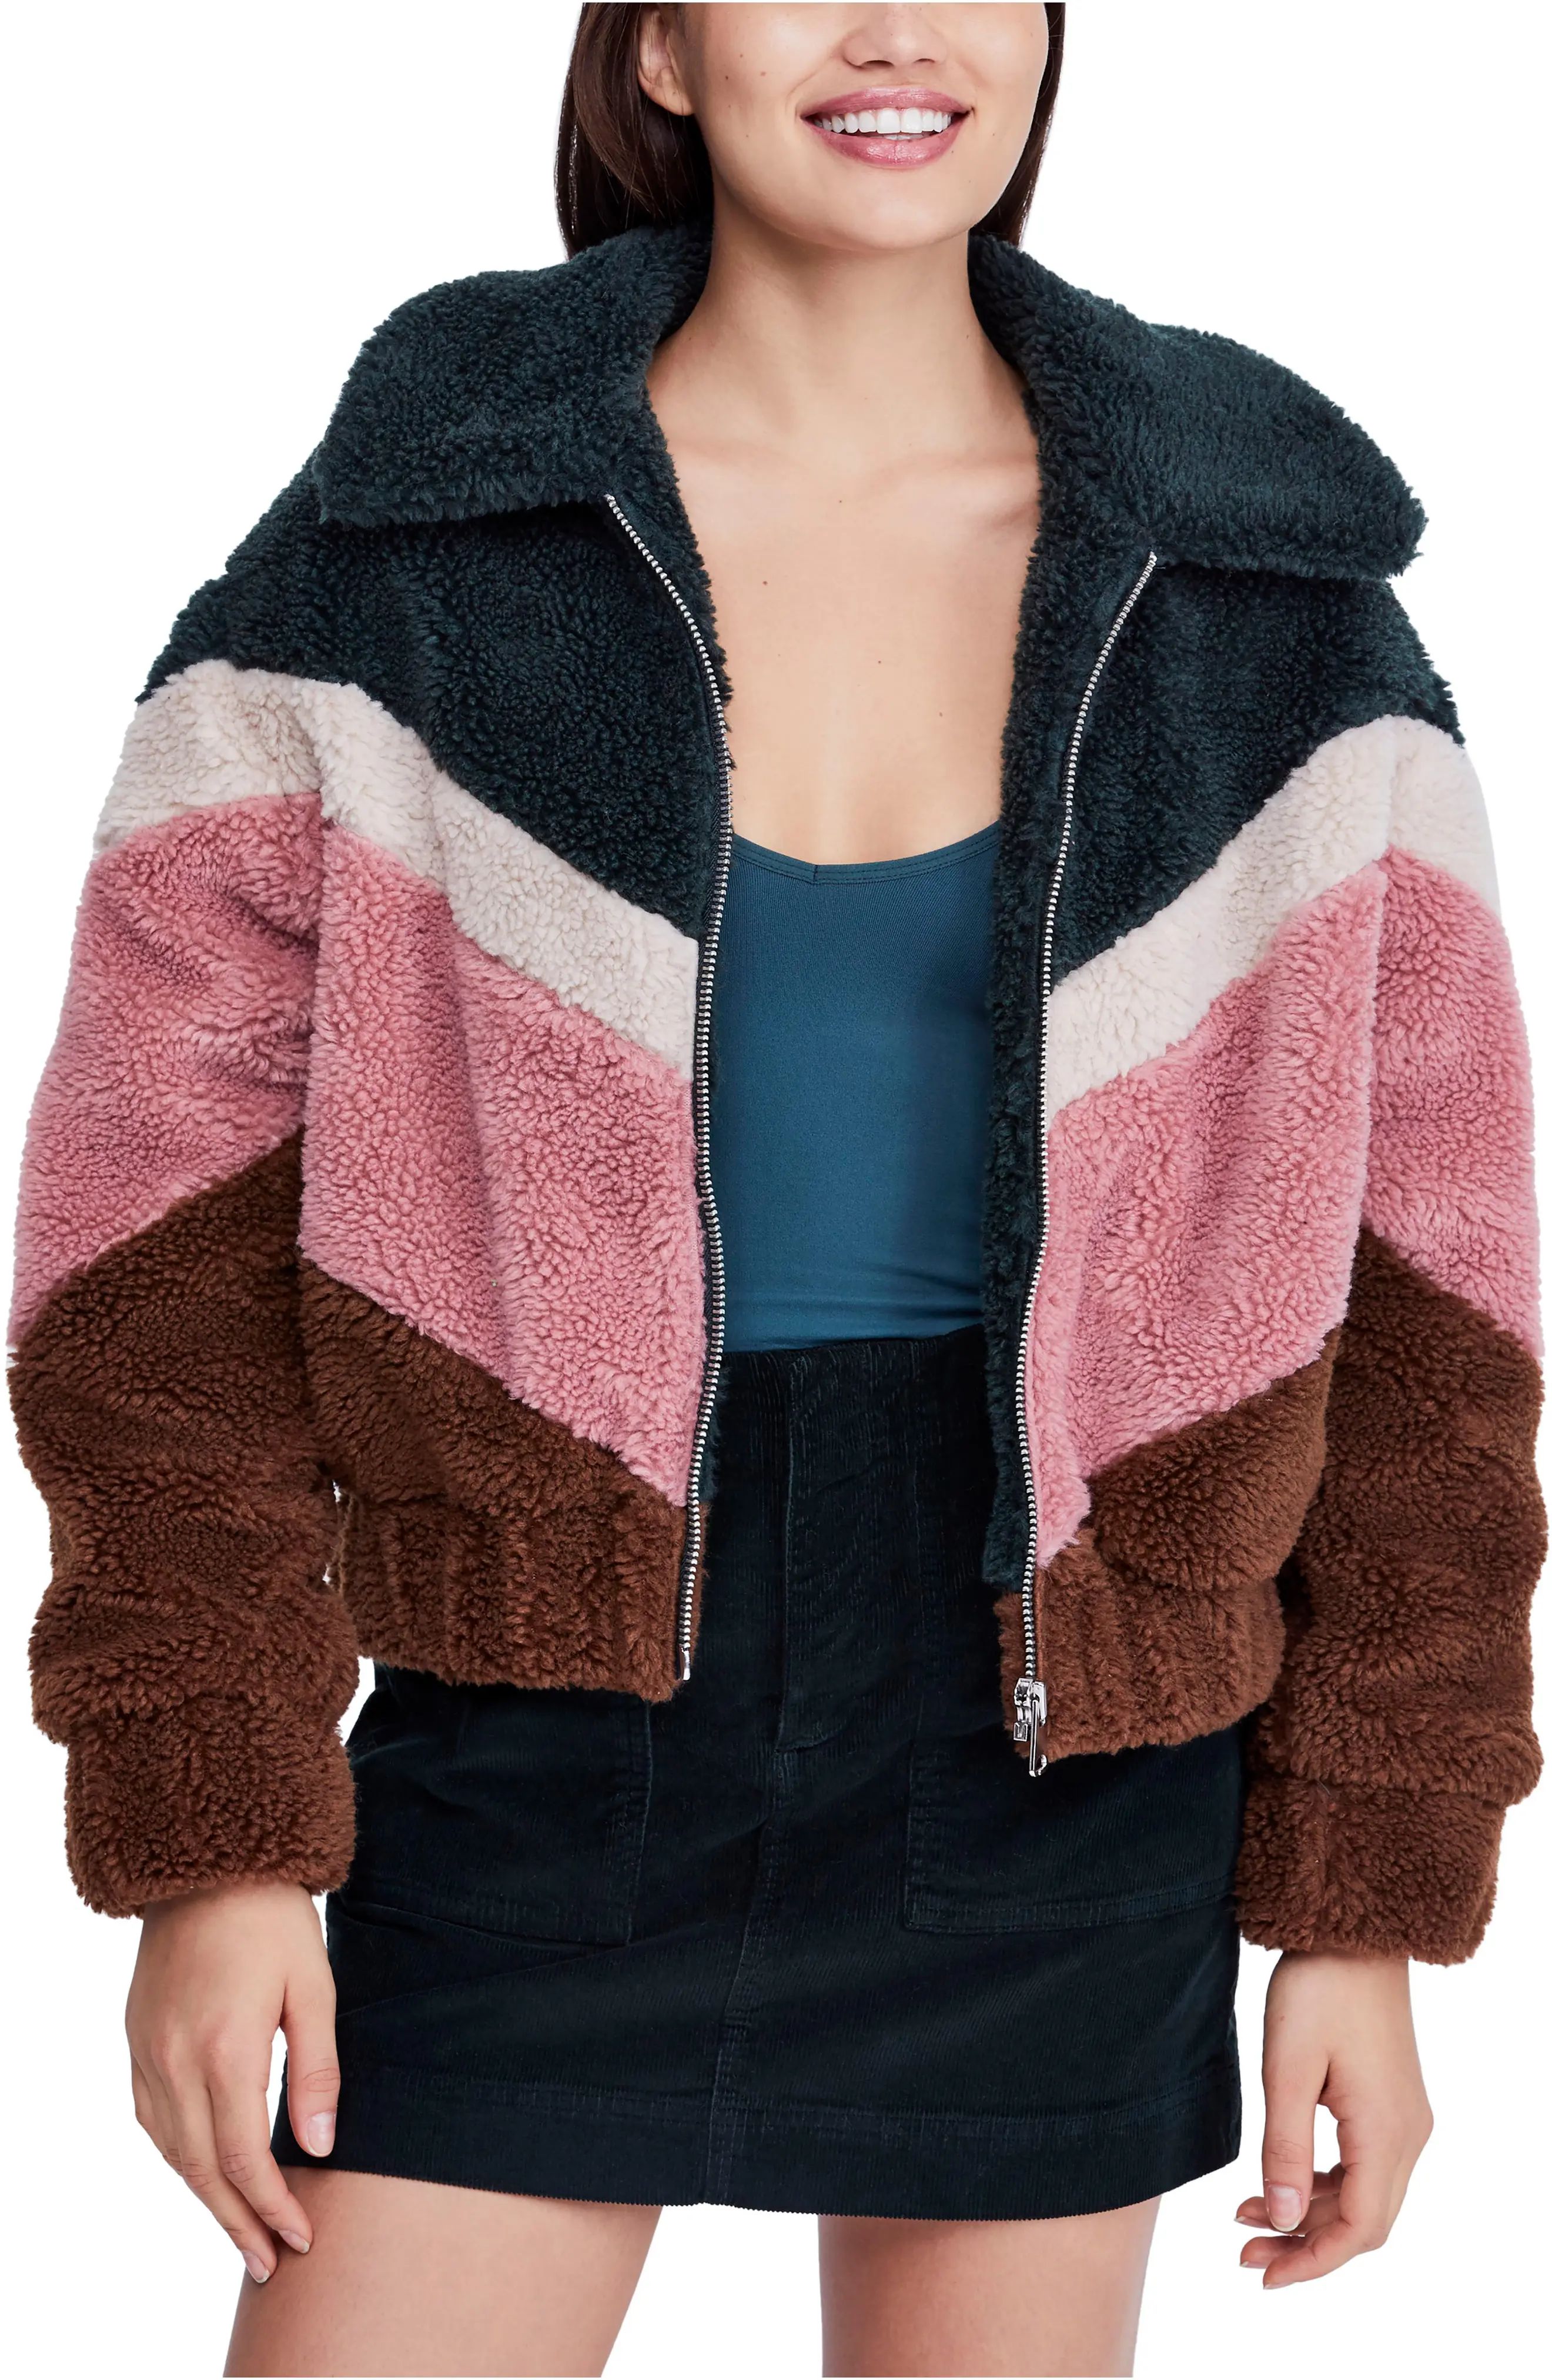 Women's Bdg Urban Outfitters Chevron Teddy Coat, Size Large - Pink | Nordstrom